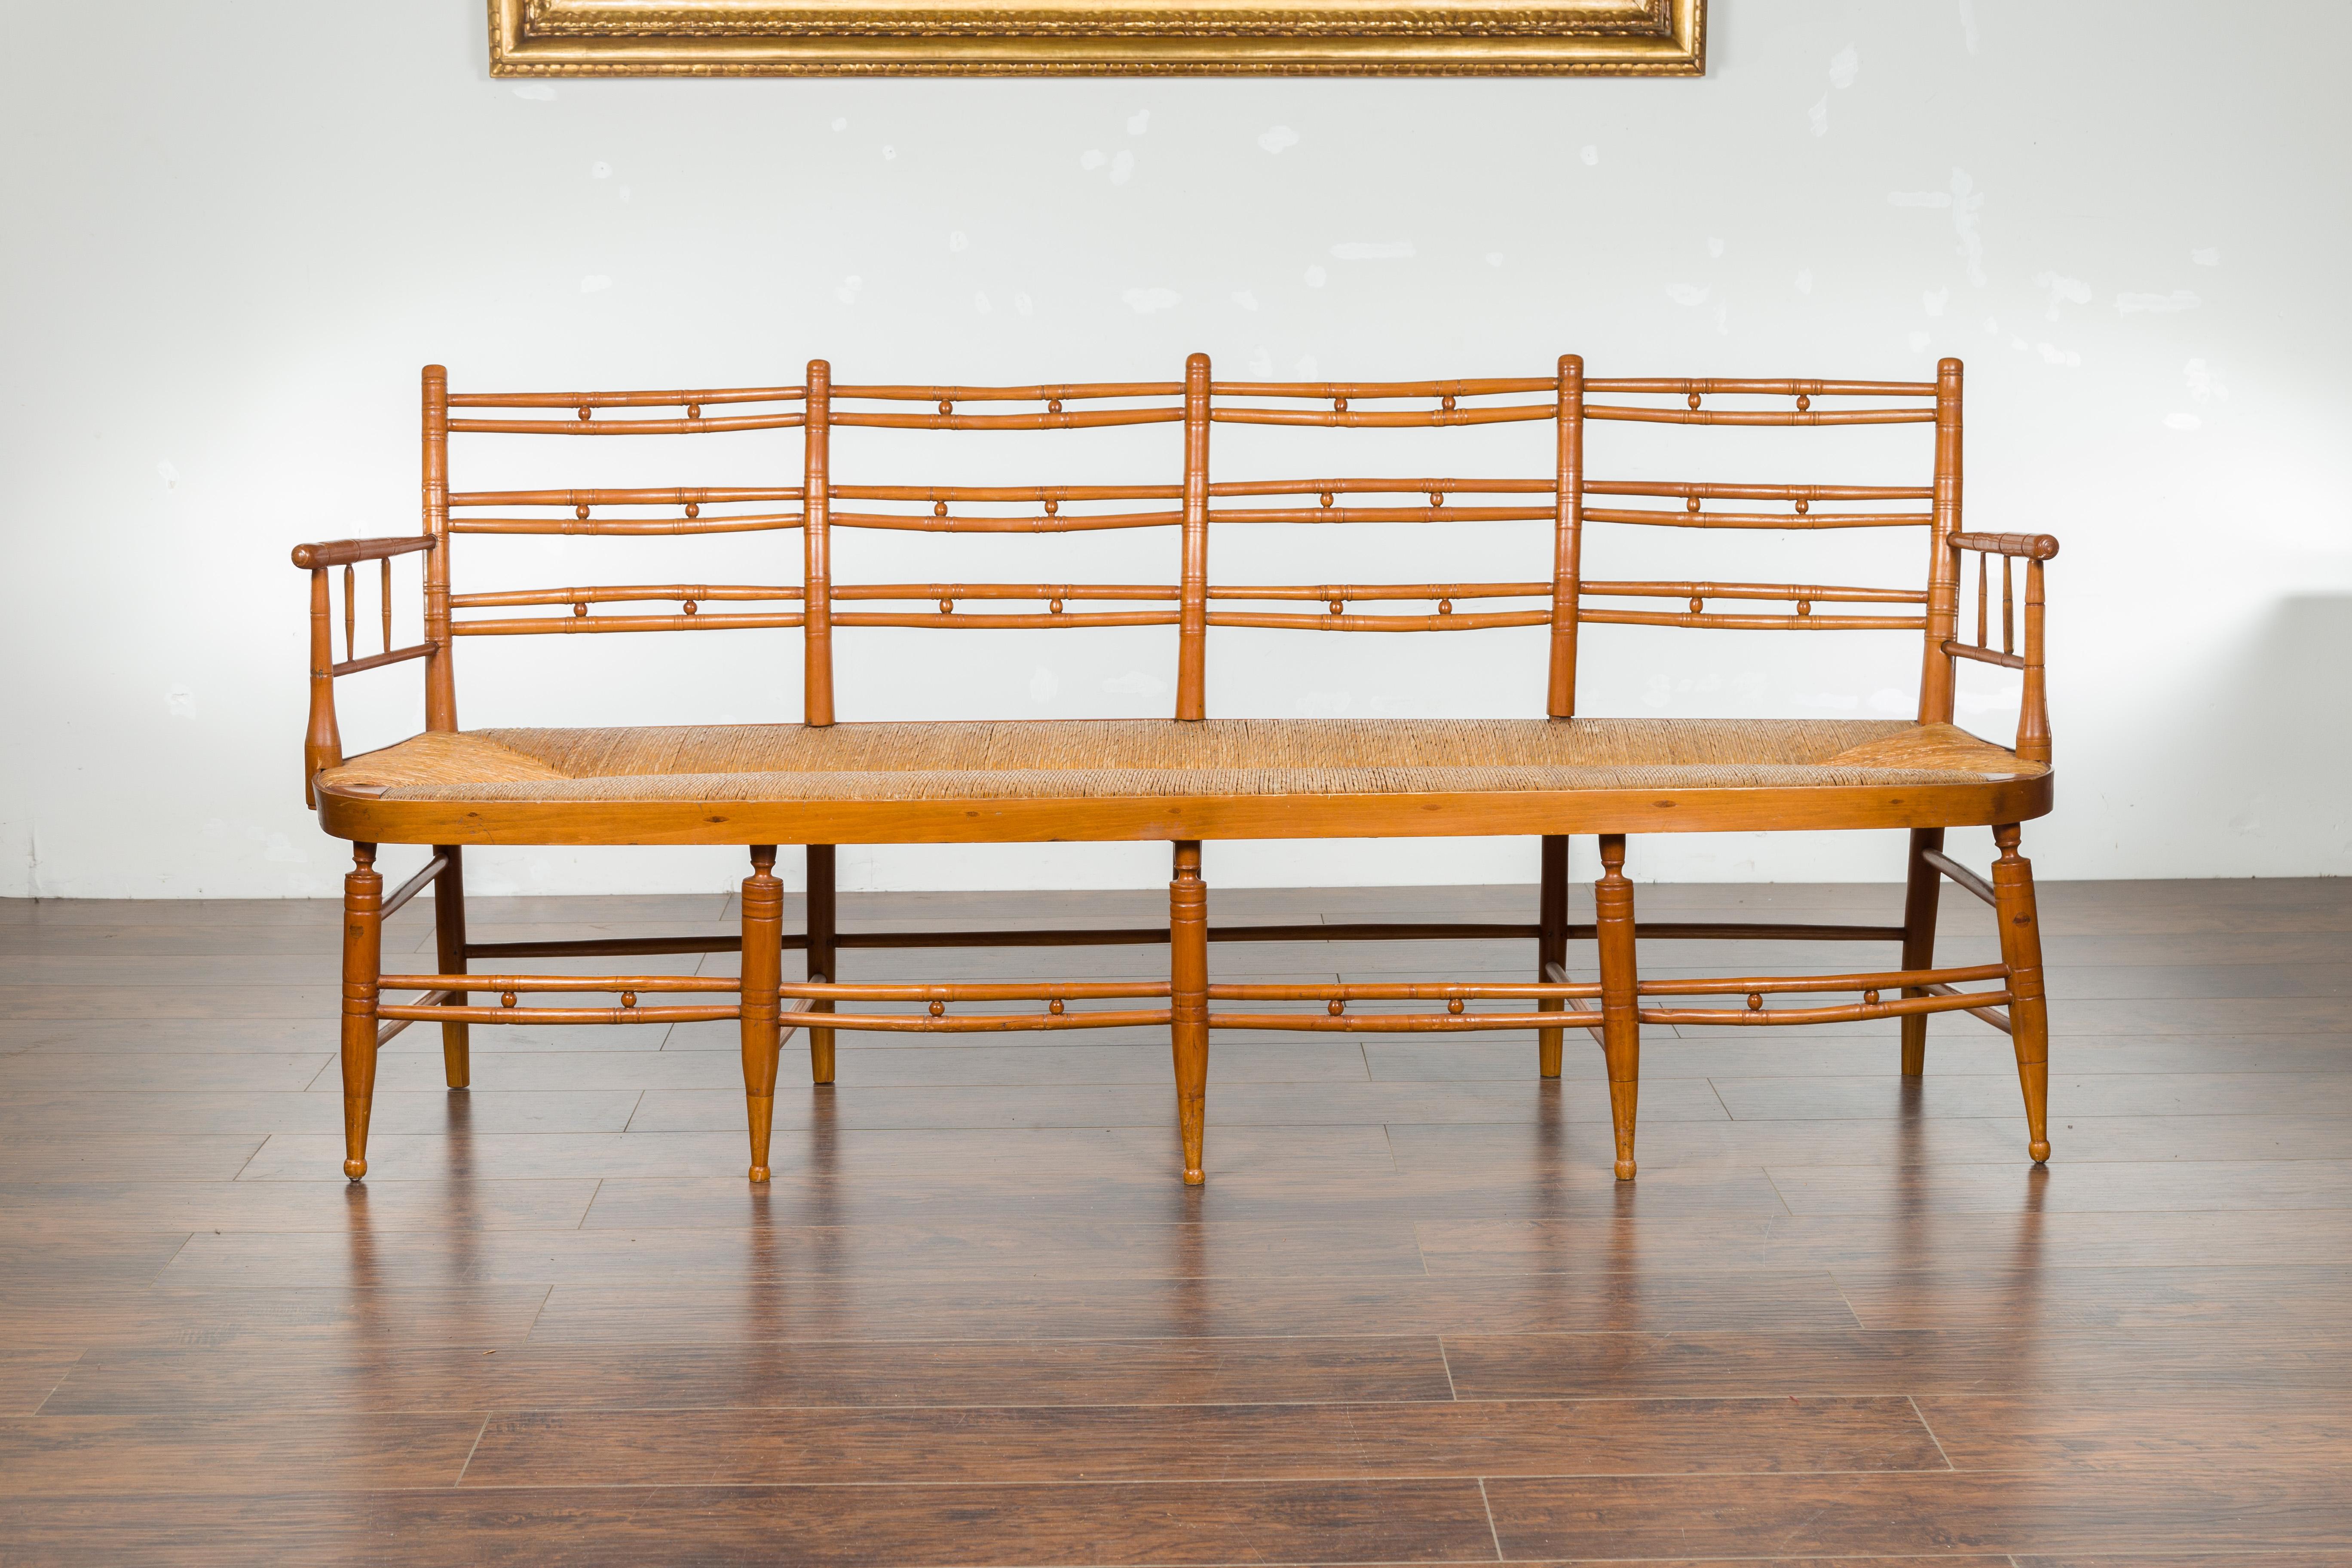 A rustic French walnut bench from the 19th century, with open back and rush seat. Created in France during the 19th century, this walnut bench features a slightly out-curving back with pierced accents, connected to two arms flanking a long